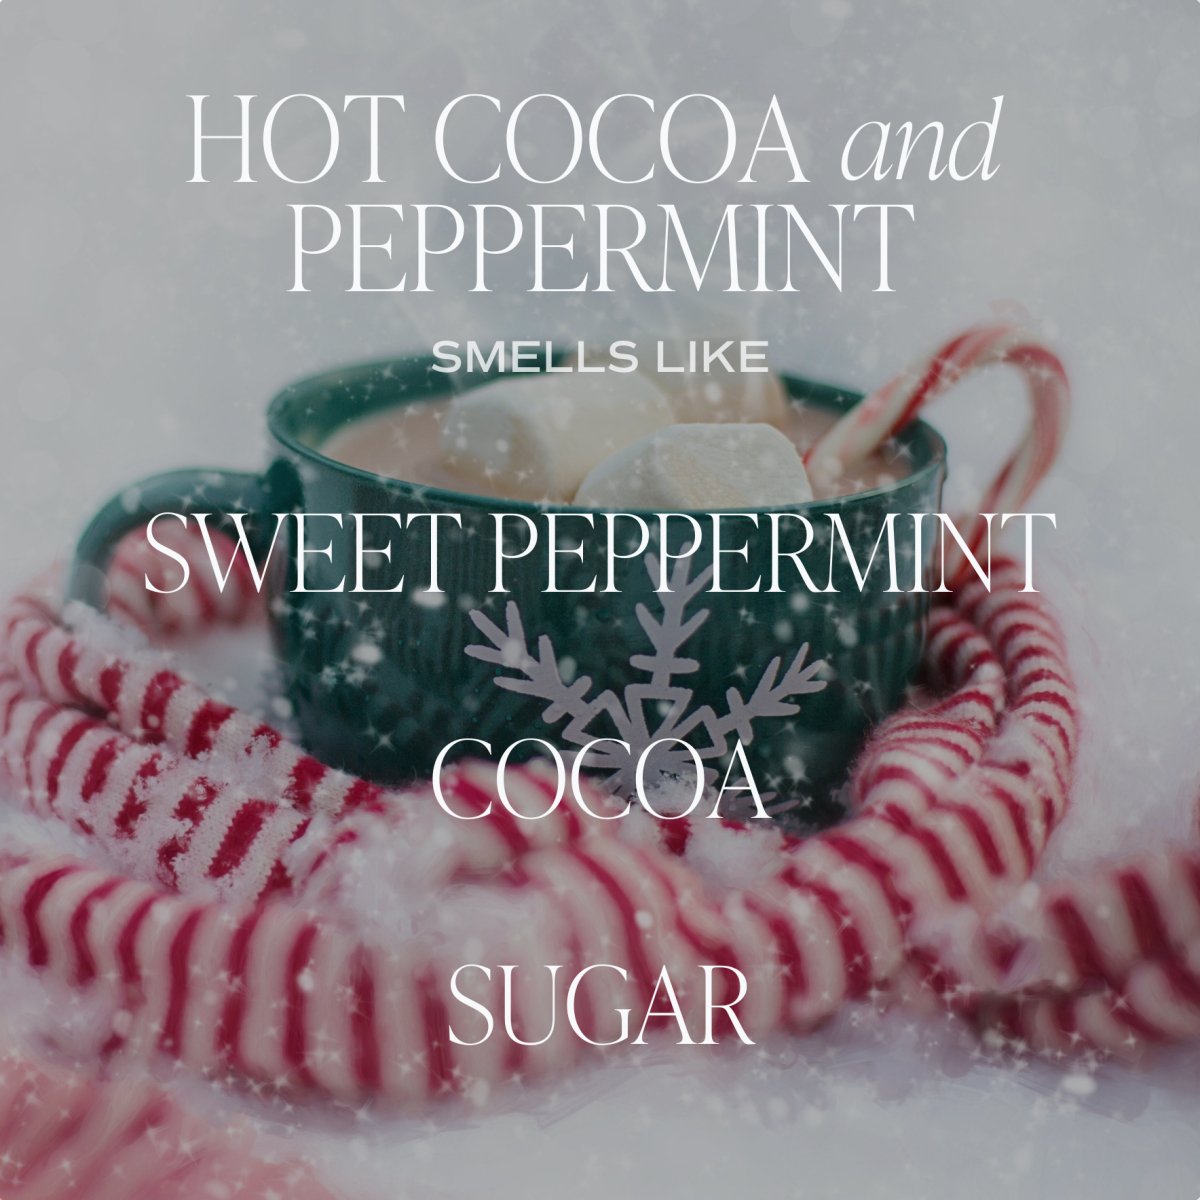 Sweet Water Decor Hot Cocoa and Peppermint Soy Candle - White Jar - 11 oz - lily & onyx